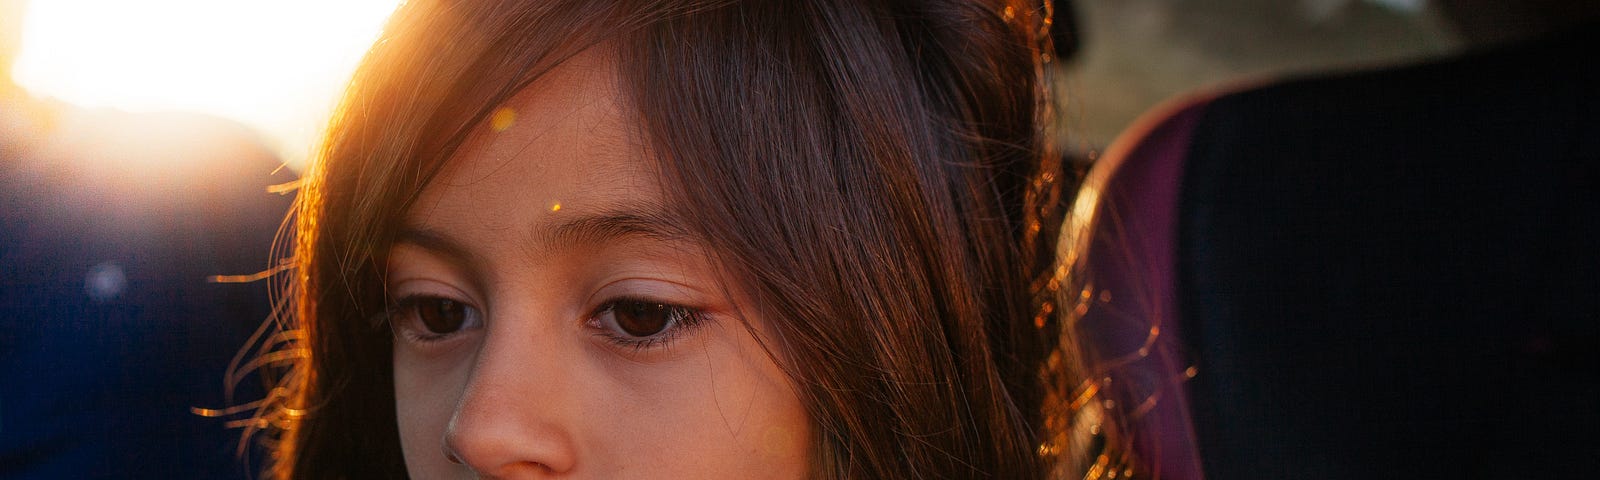 A close-up photograph of a young girl looking off into the distance.